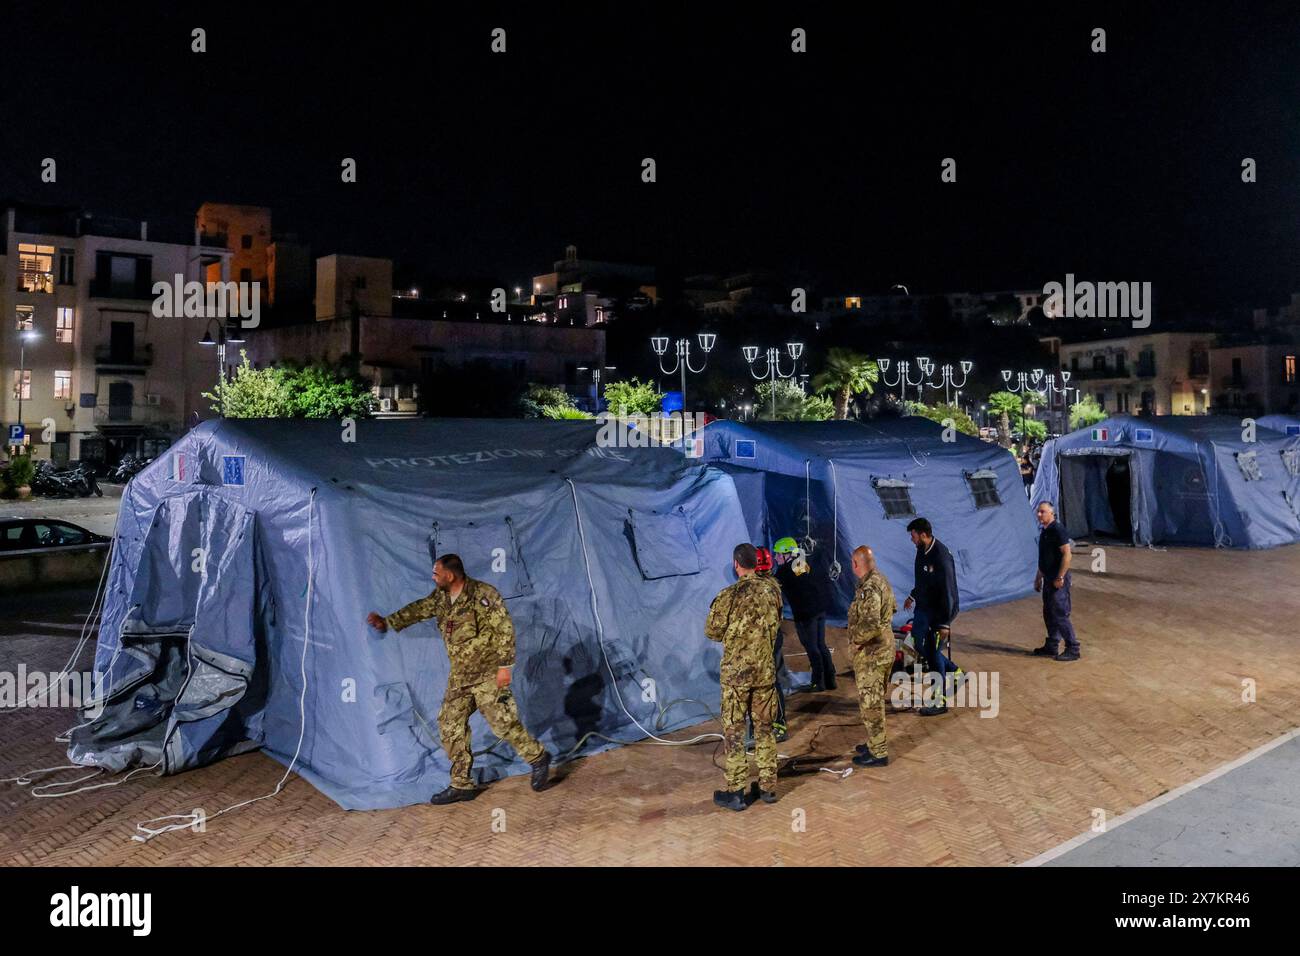 Italy: Campi Flegrei, bradisismo Campania s civil protection set up a tensile structure at the port of pozzuoli for people who are not confident about returning to their homes after the earthquake tremors, near Naples, southern Italy, 20 May 2024. The tremor that occurred at 8.10pm with epicentre in the Campi Flegrei was of magnitude 4.4. This was reported by the National Institute of Geophysics and Volcanology, according to which the depth of the quake was three kilometres. ABP02093 Copyright: xAntonioxBalascox Stock Photo